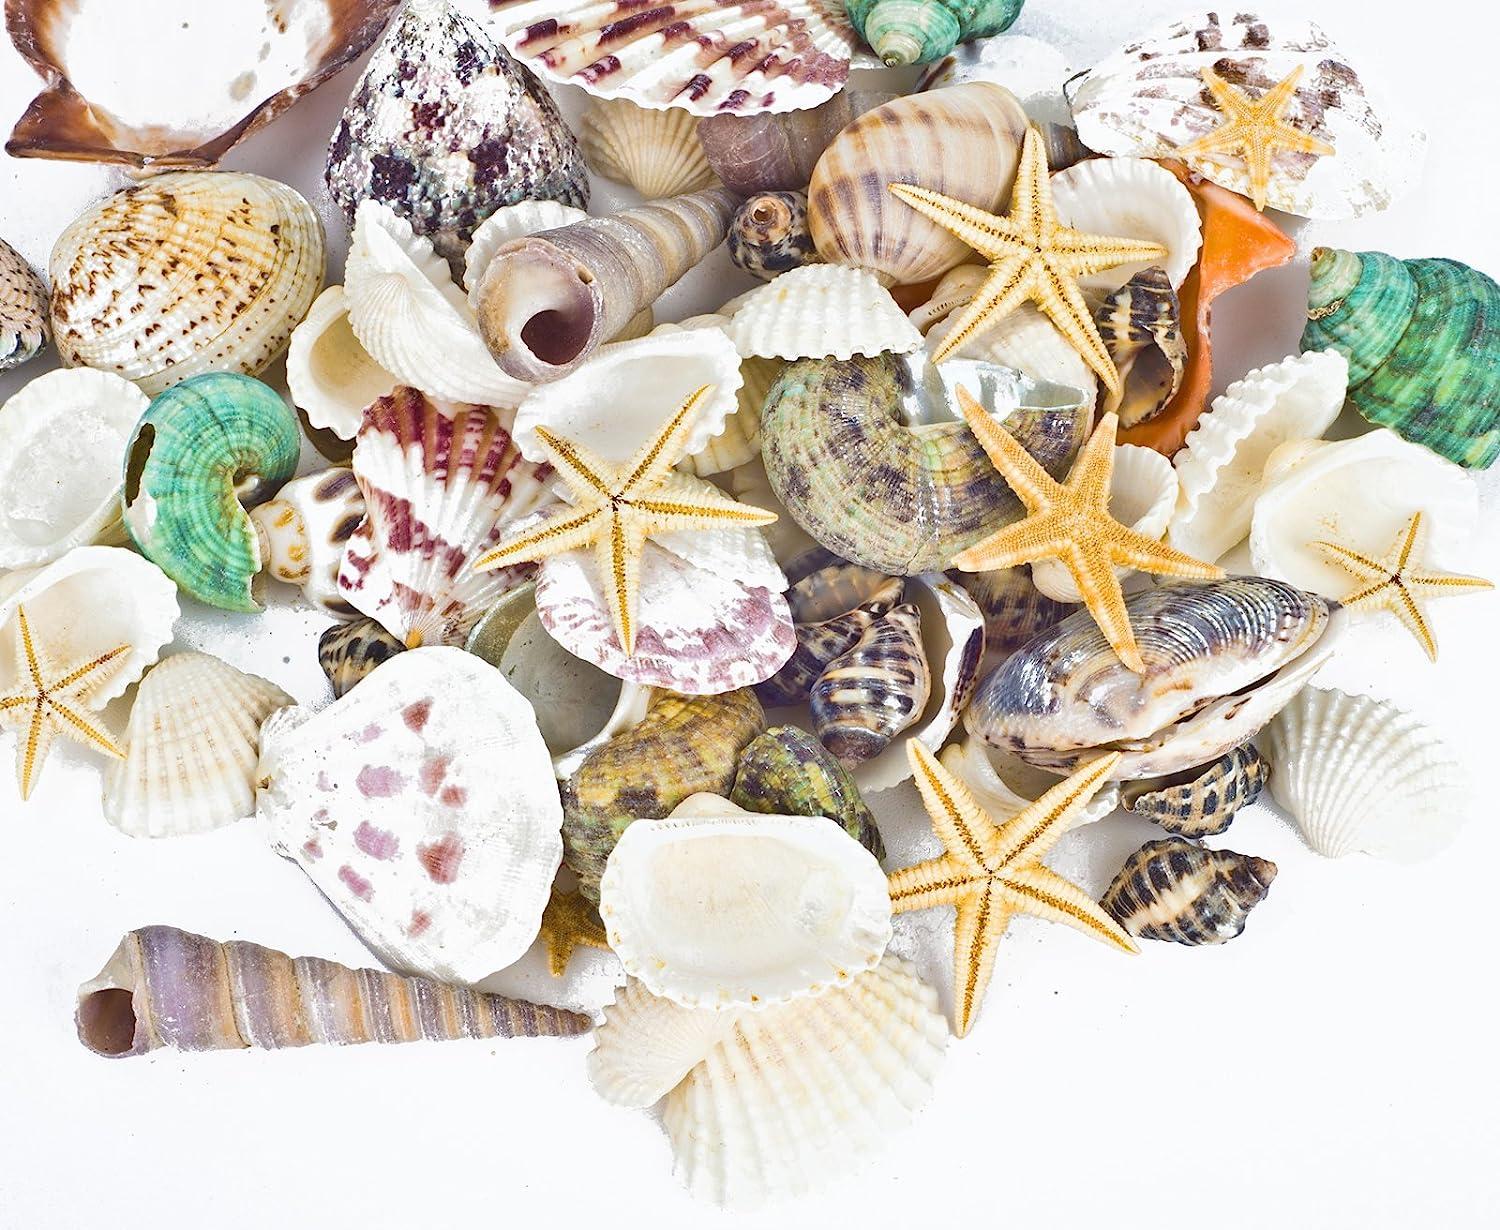 Famoby Sea Shells Mixed Beach Seashells Starfish for Beach Theme Party  Wedding Decorations DIY Crafts Candle Making Fish Tank Vase Fillers Home  Decorations Supplies 70+ pcs